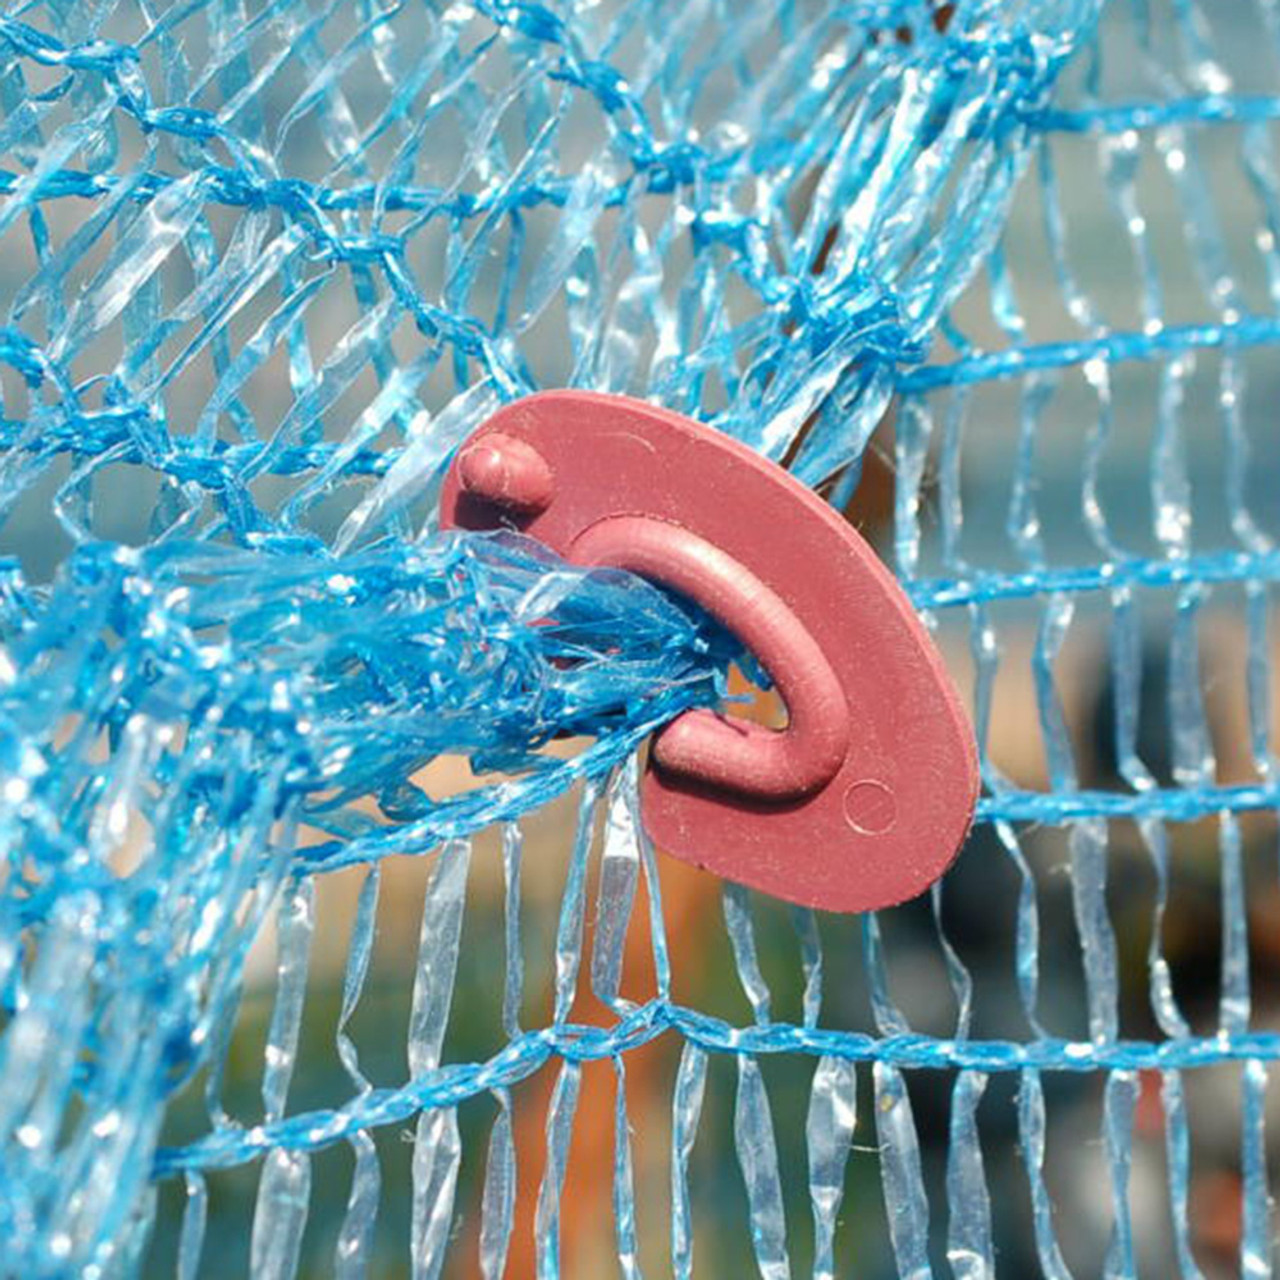 Net clip for join nets together or to trellis wires.